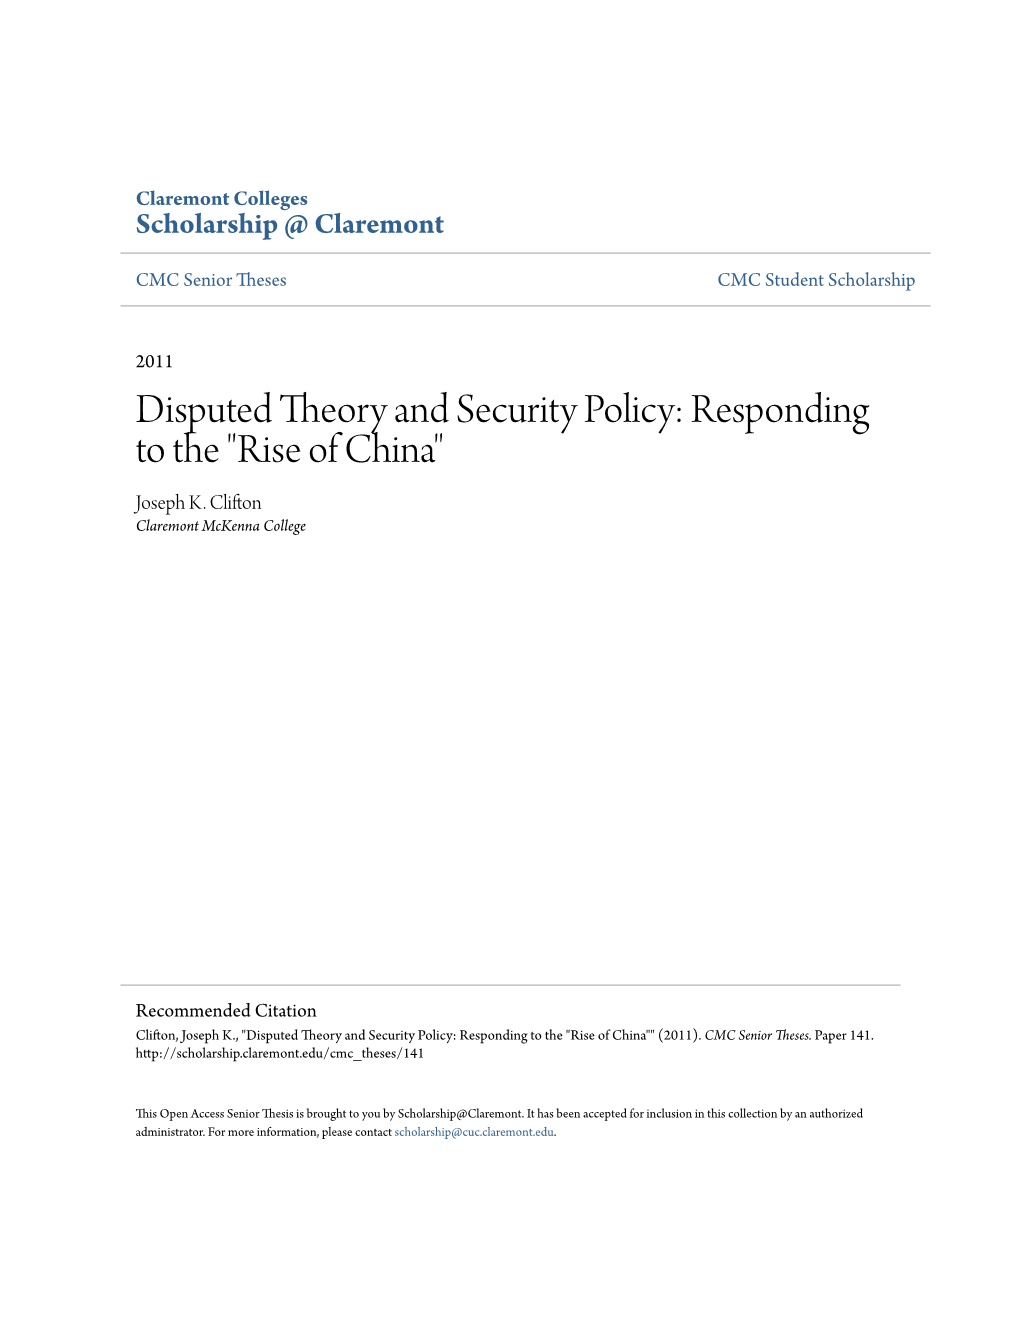 Disputed Theory and Security Policy: Responding to the "Rise of China" Joseph K